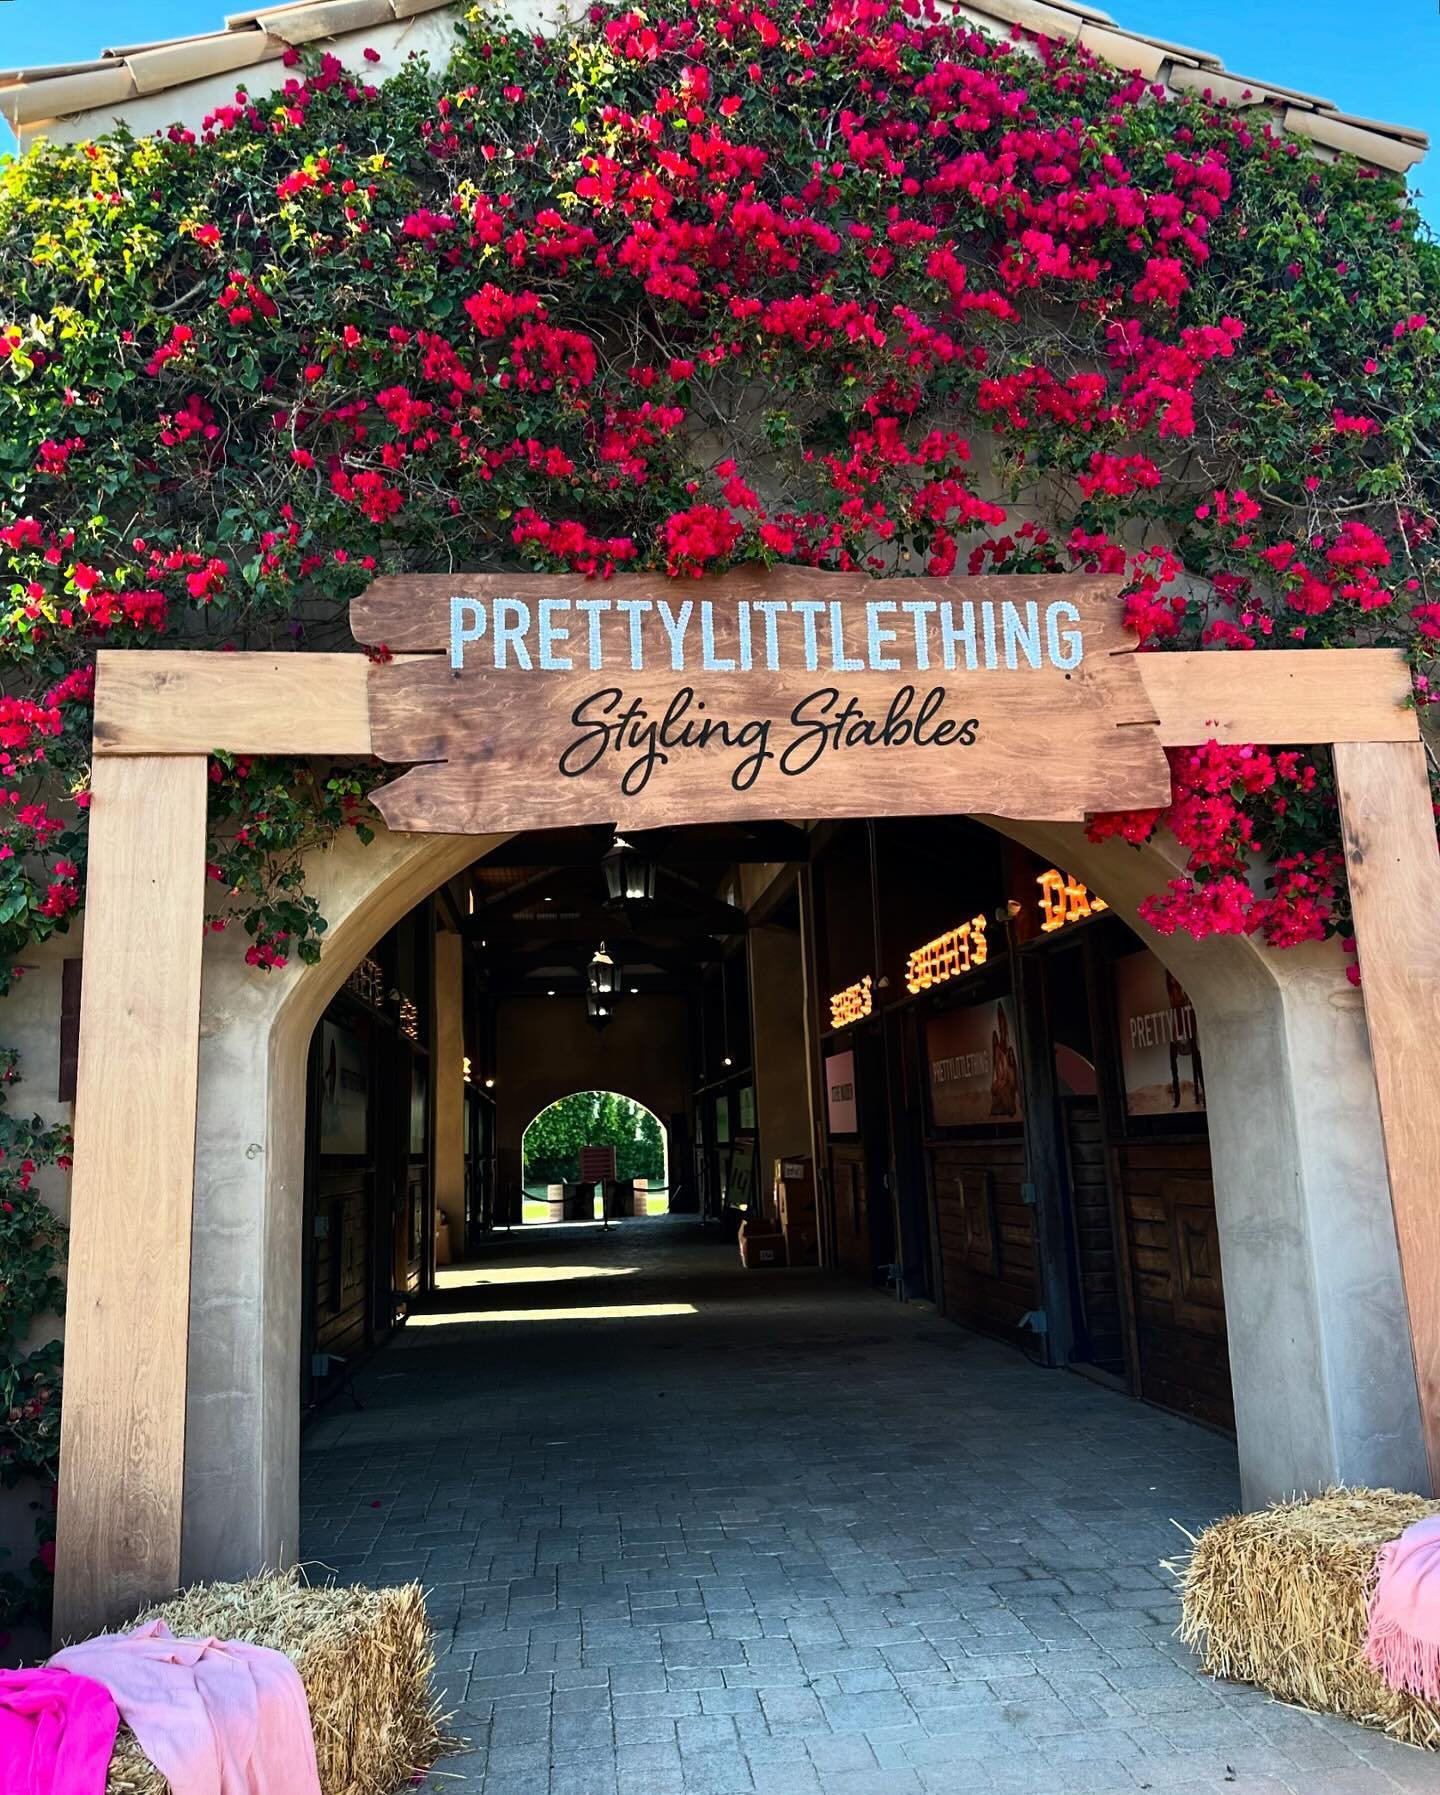 Welcome to the @prettylittlething styling stables! Every sign was custom made from the outside in and @lucyzuzuarregui wins the award for the most patience after spending hours brightening up our CNC sign for the entrance. This was my favorite part, 